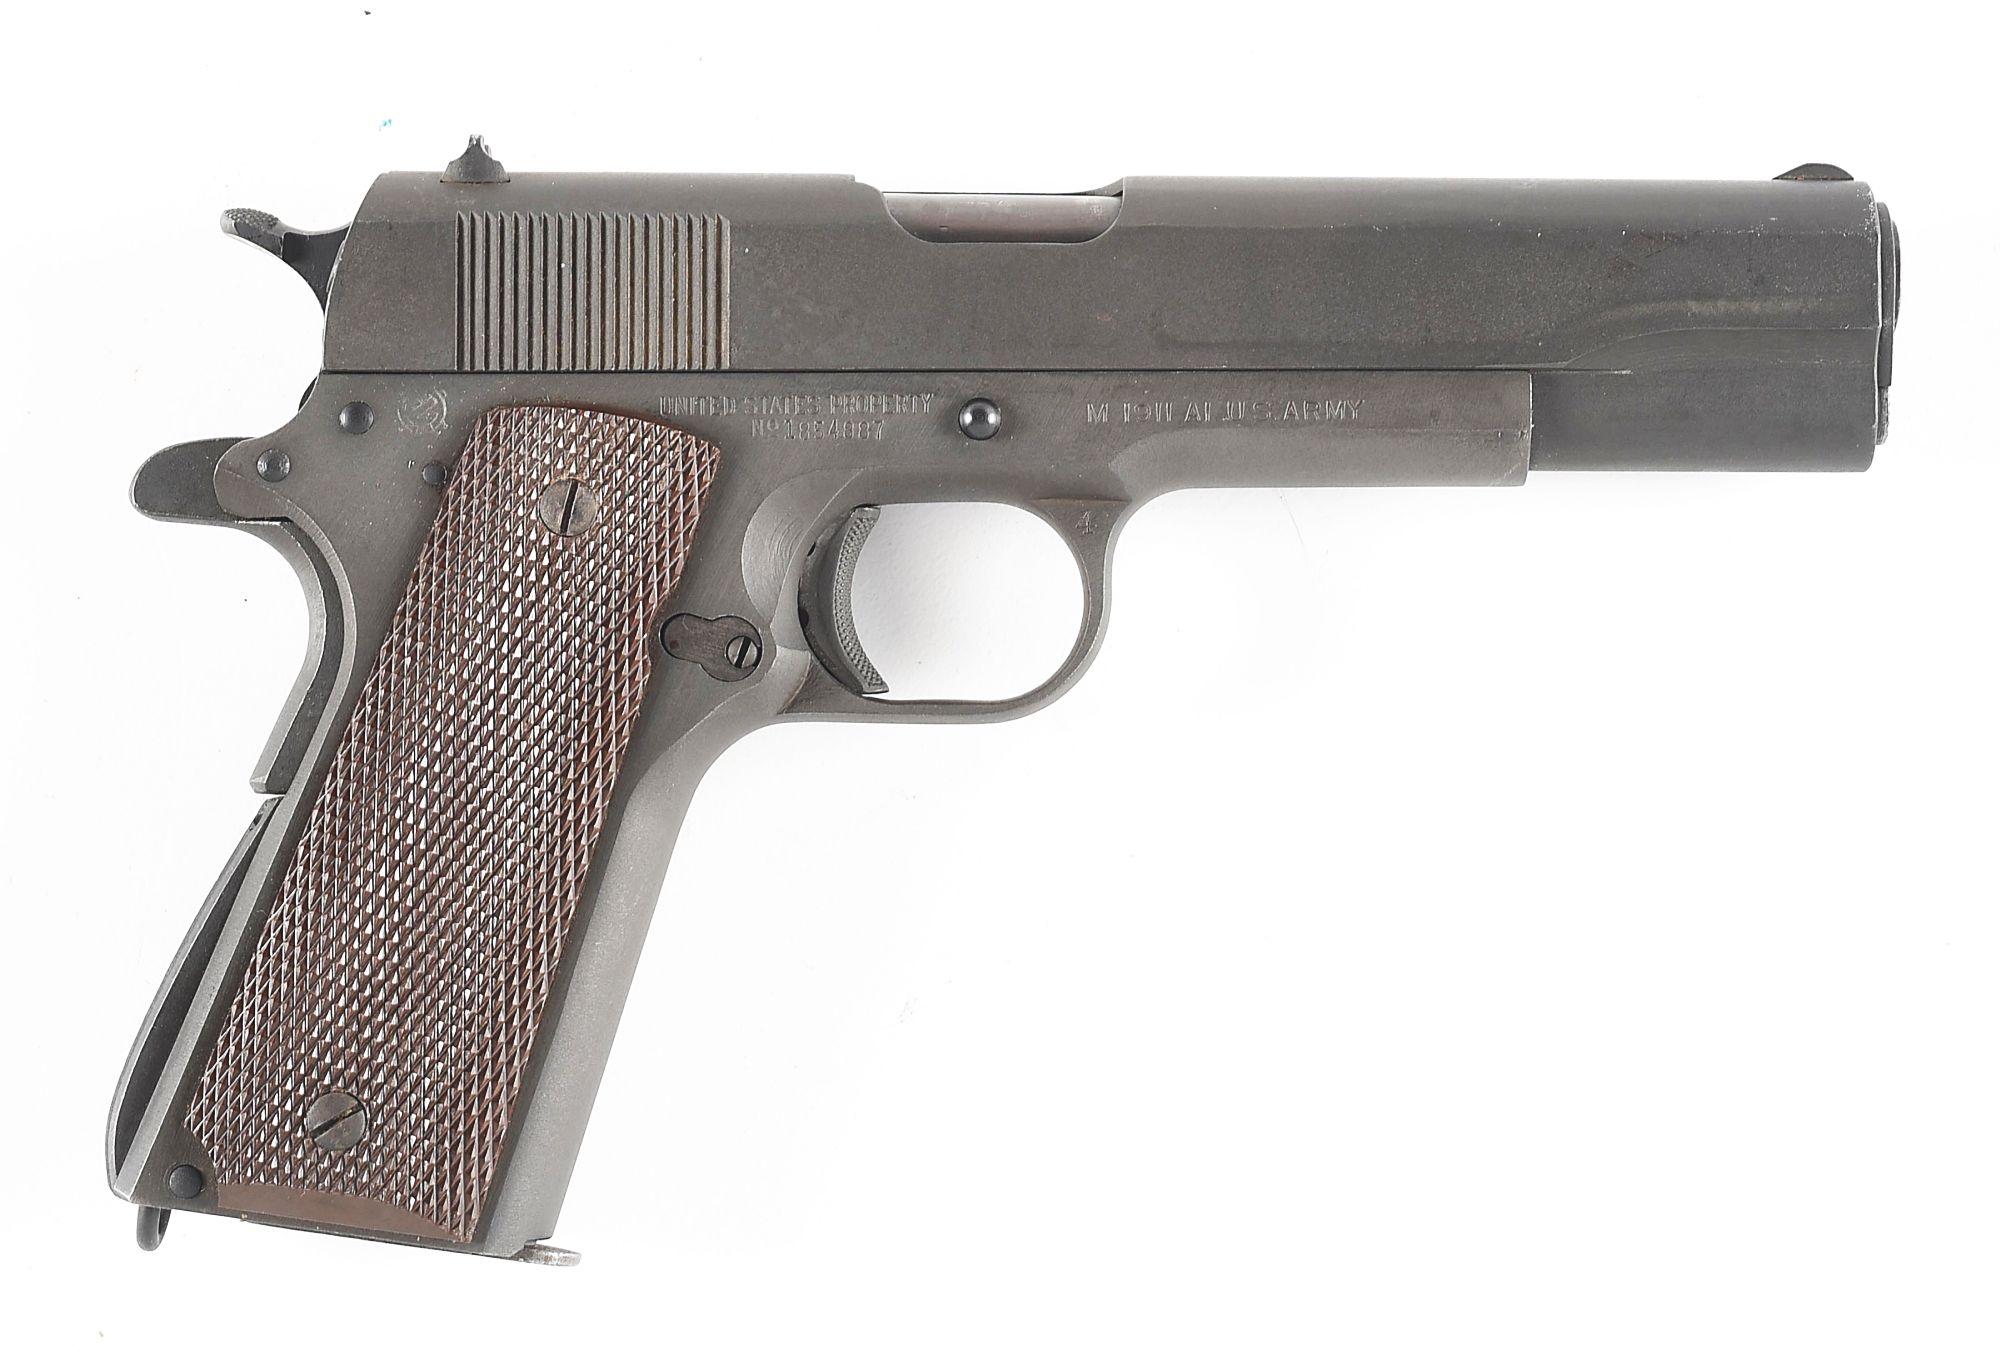 (C) ITHACA M1911 A1 SEMI-AUTOMATIC PISTOL WITH DRY BAG AND HOLSTER (1944)